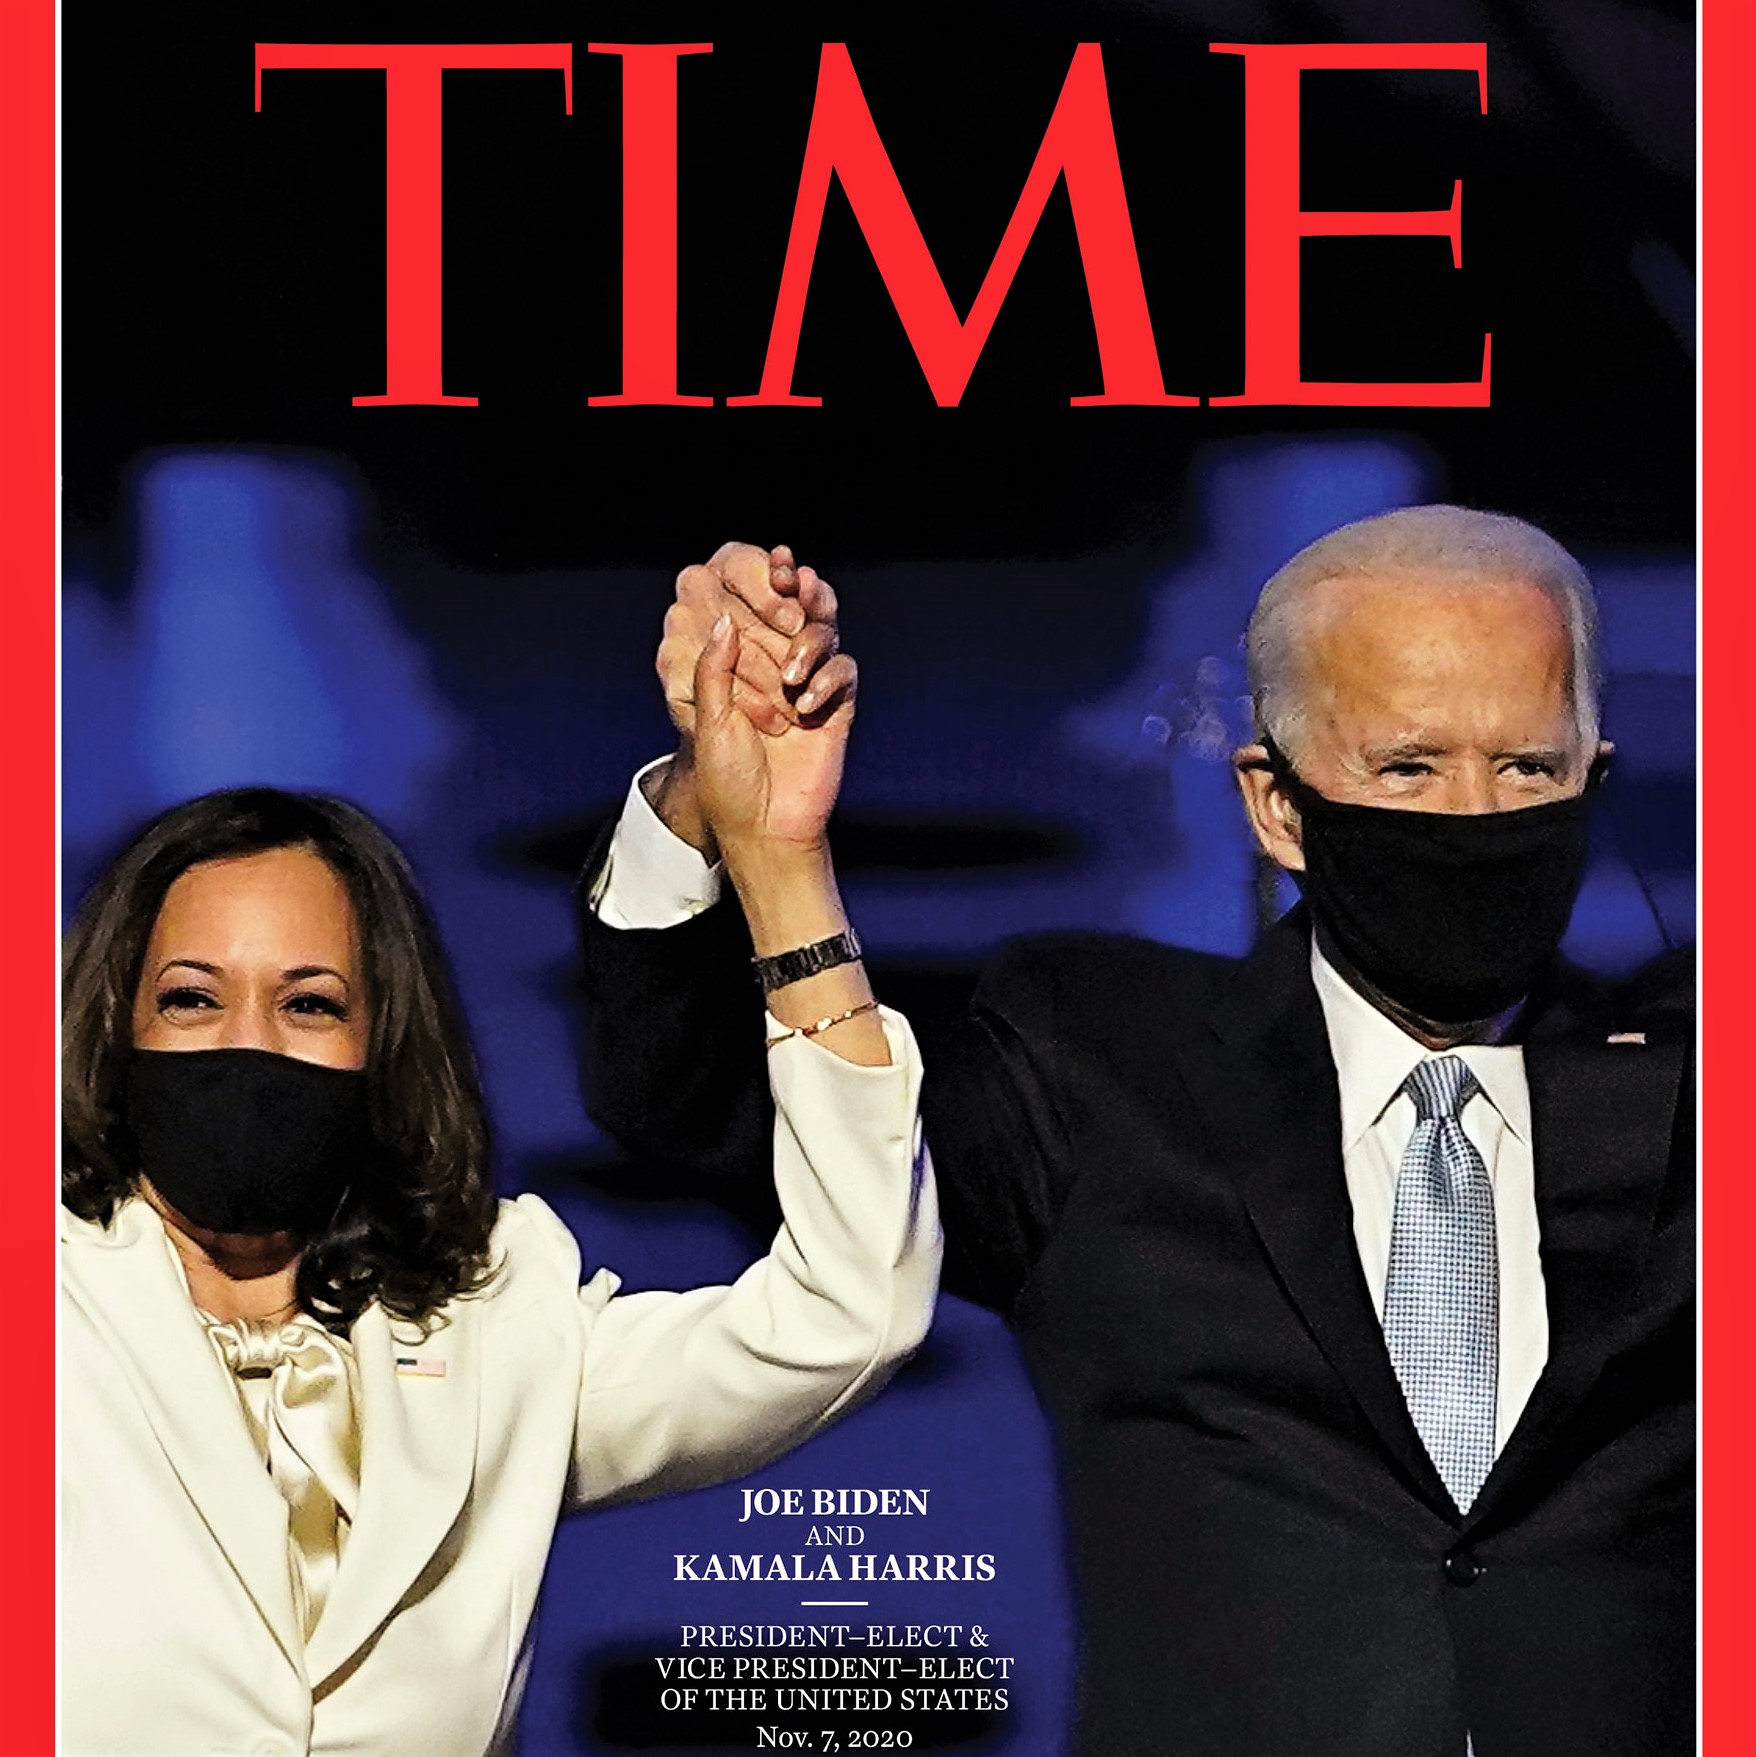 Magazine covers celebrate America returning to normalcy: Time